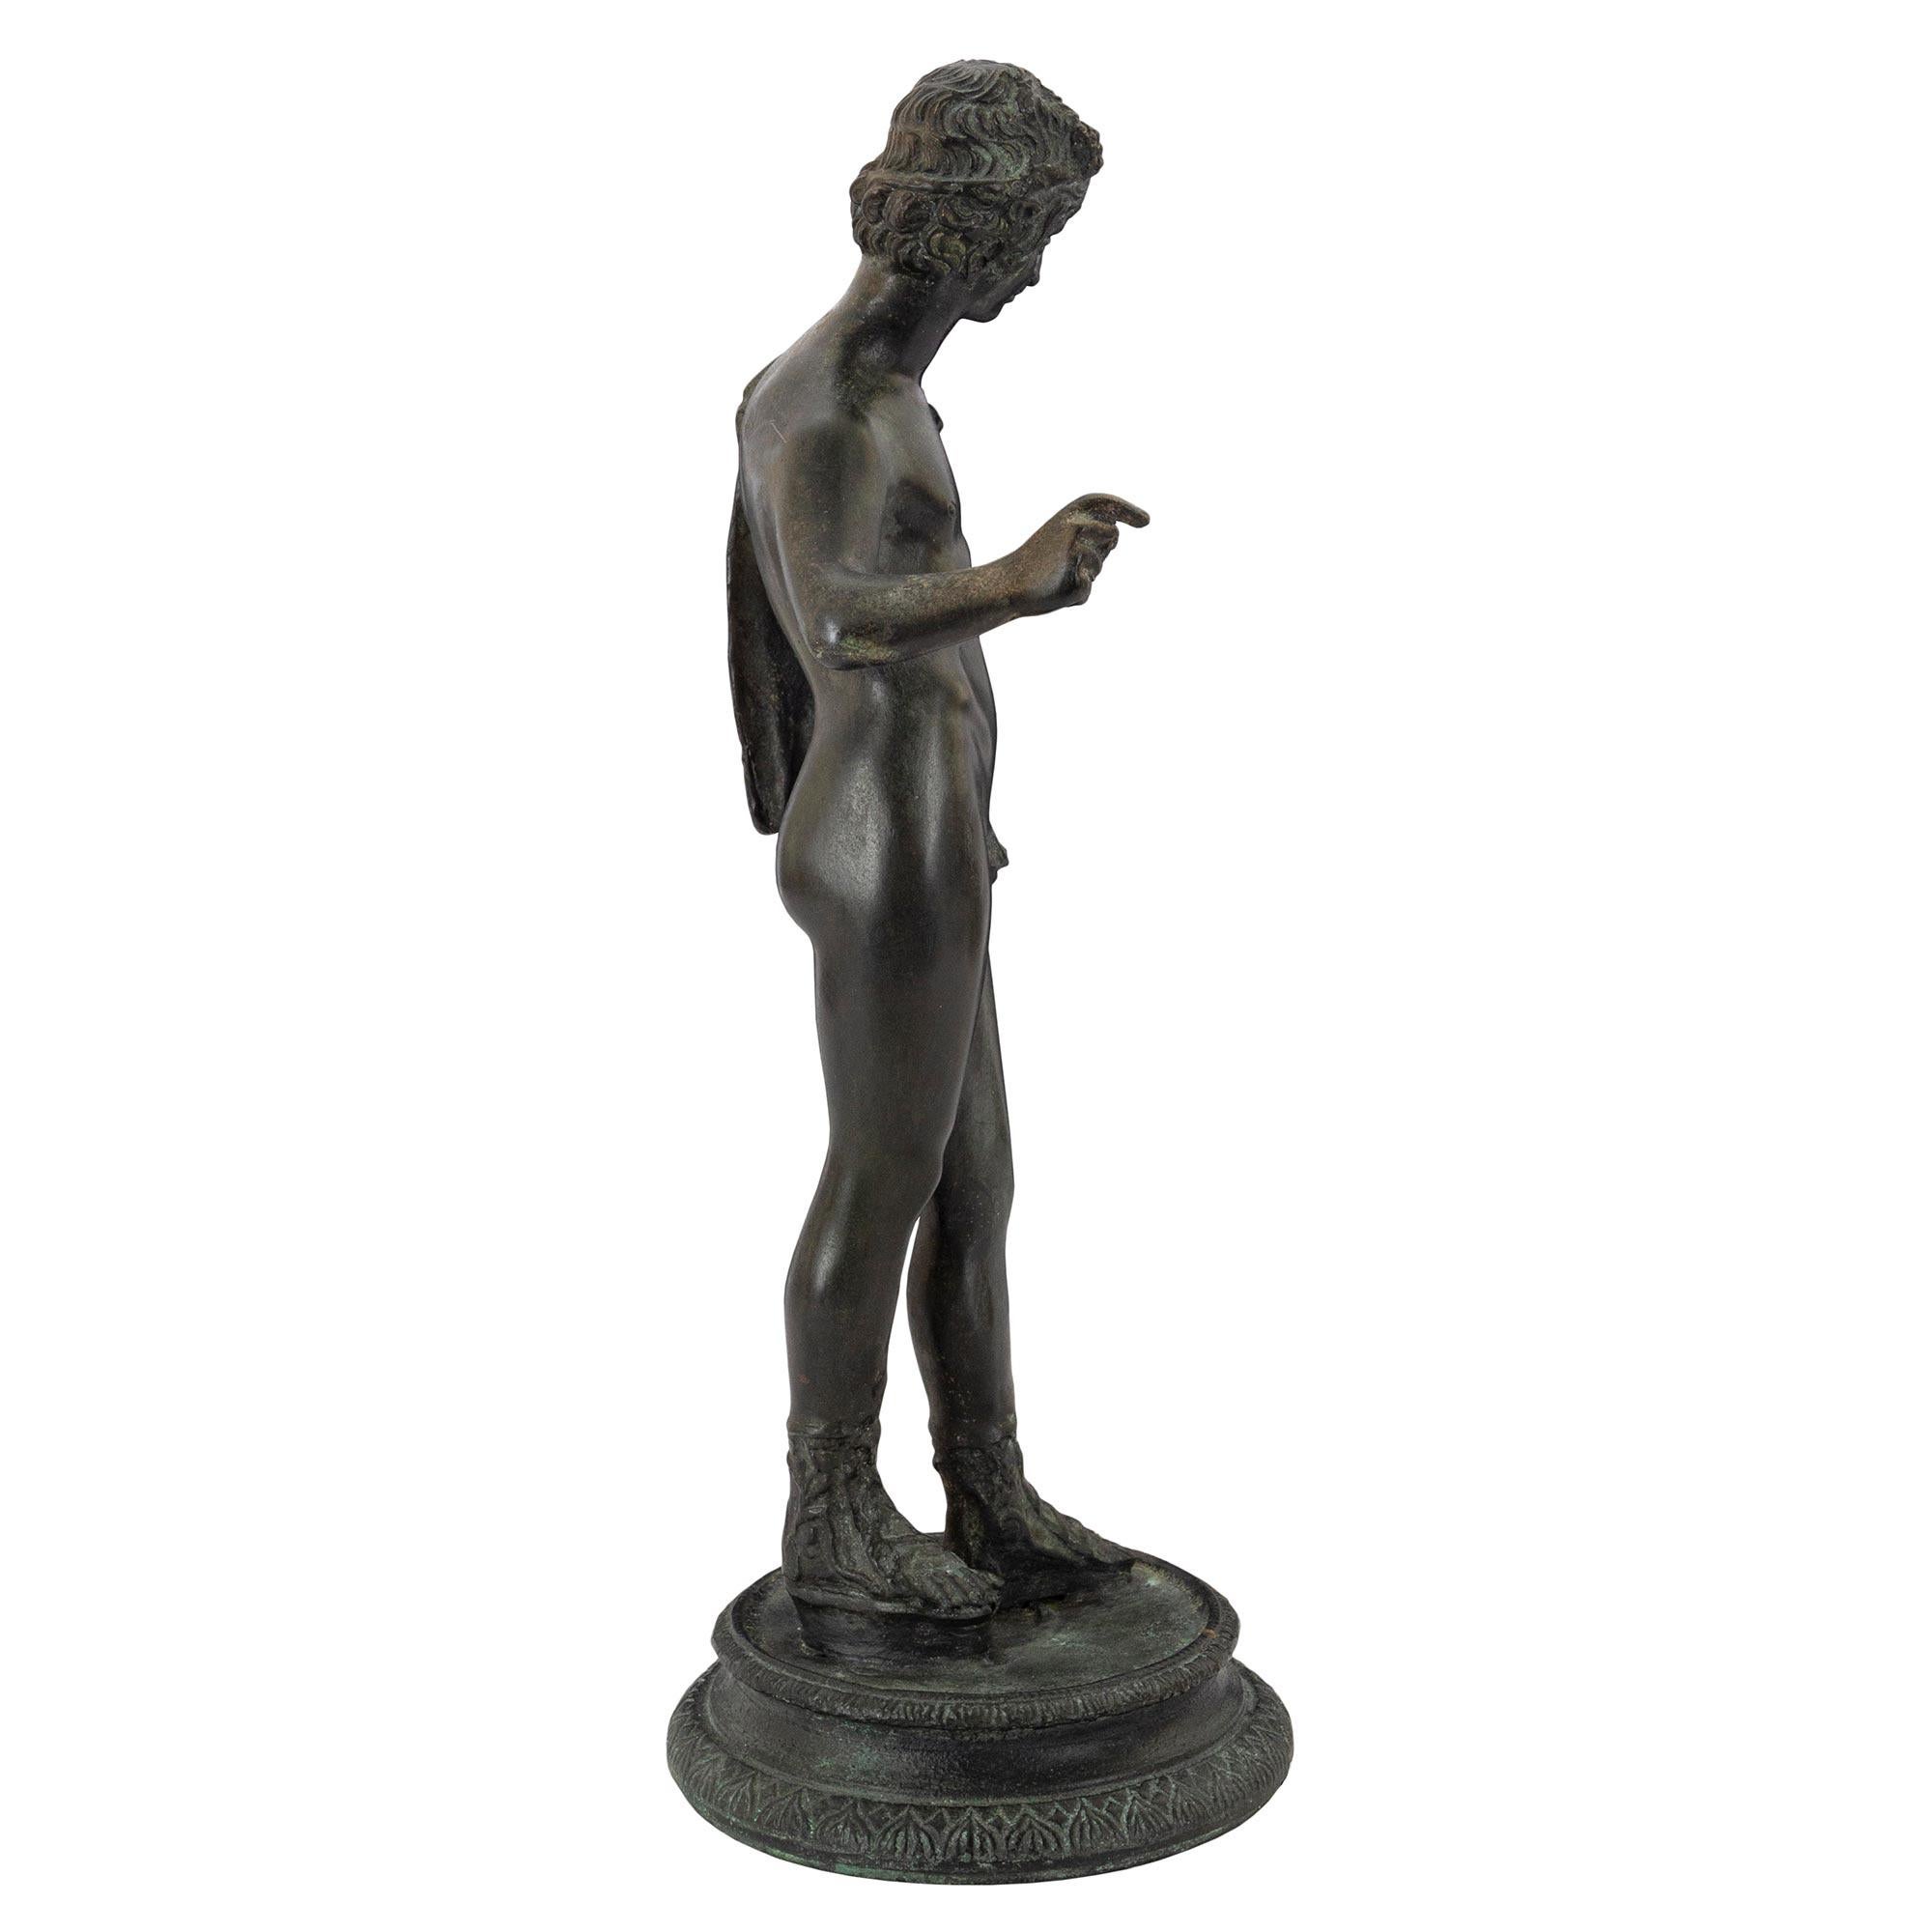 A handsome 19th century bronze statue of a young hunter. Raised on a circular moulded base with detailed chasing surrounds. The figure of a young male hunter with classic strapped sandals stands proudly wearing fabric draped on one shoulder